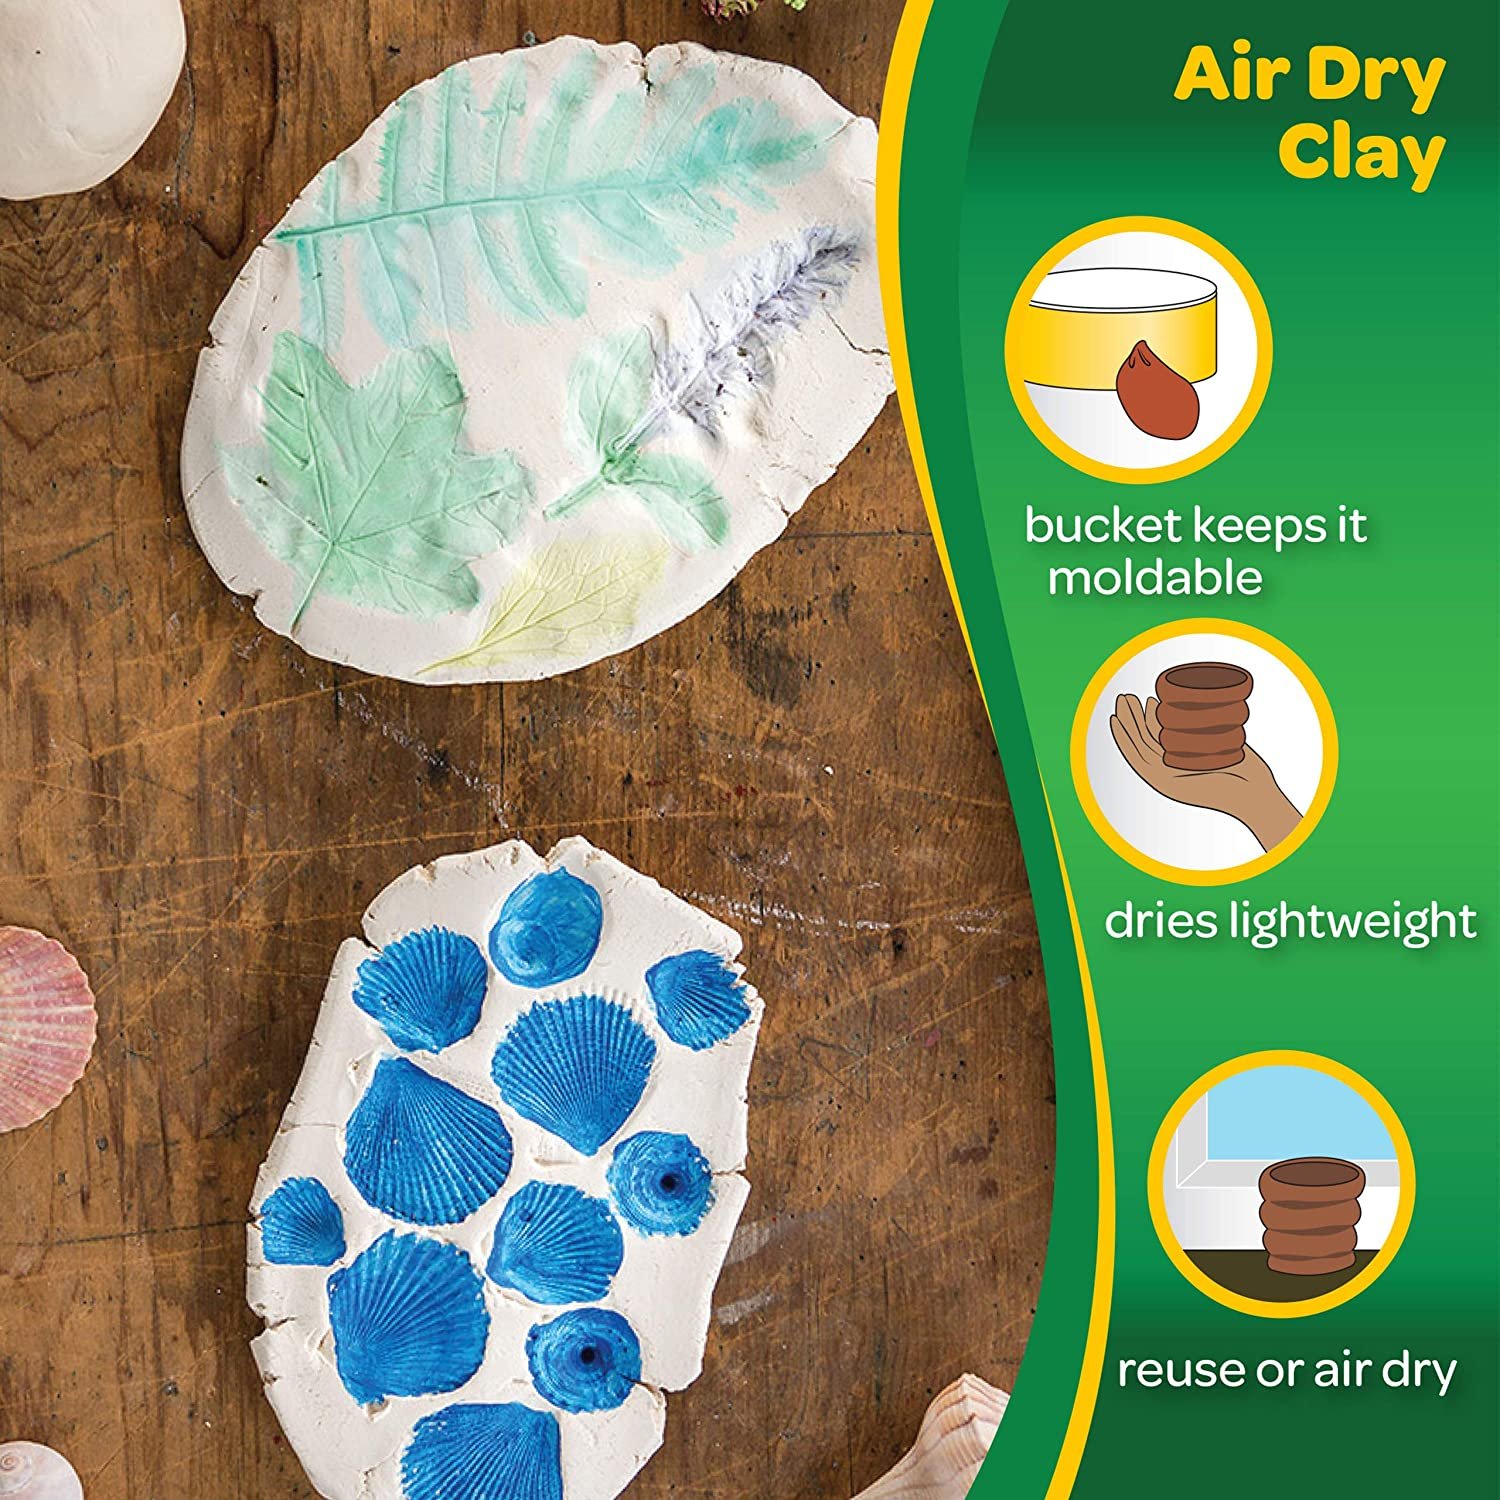 Crayola Air-Dry Clay, White, 2.5 Lb Resealable Bucket - image 5 of 11